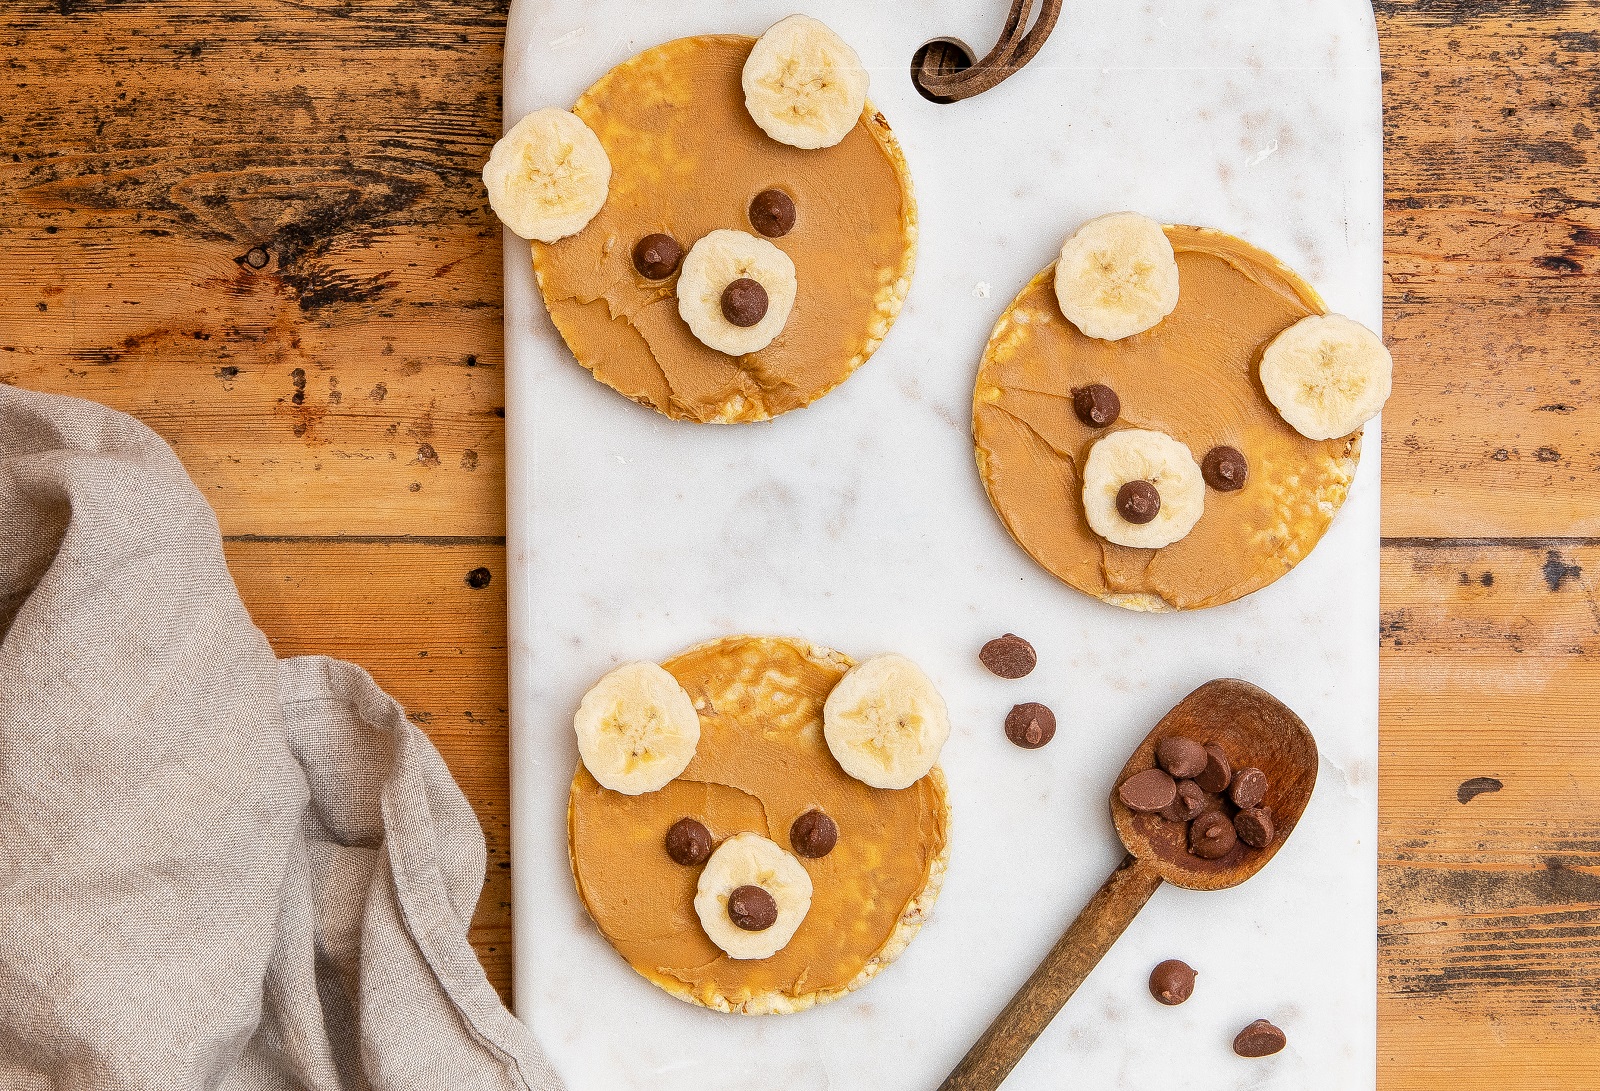 Fun Teddy Bears made from CORN THINS slices, banana, choc chips & nut butter